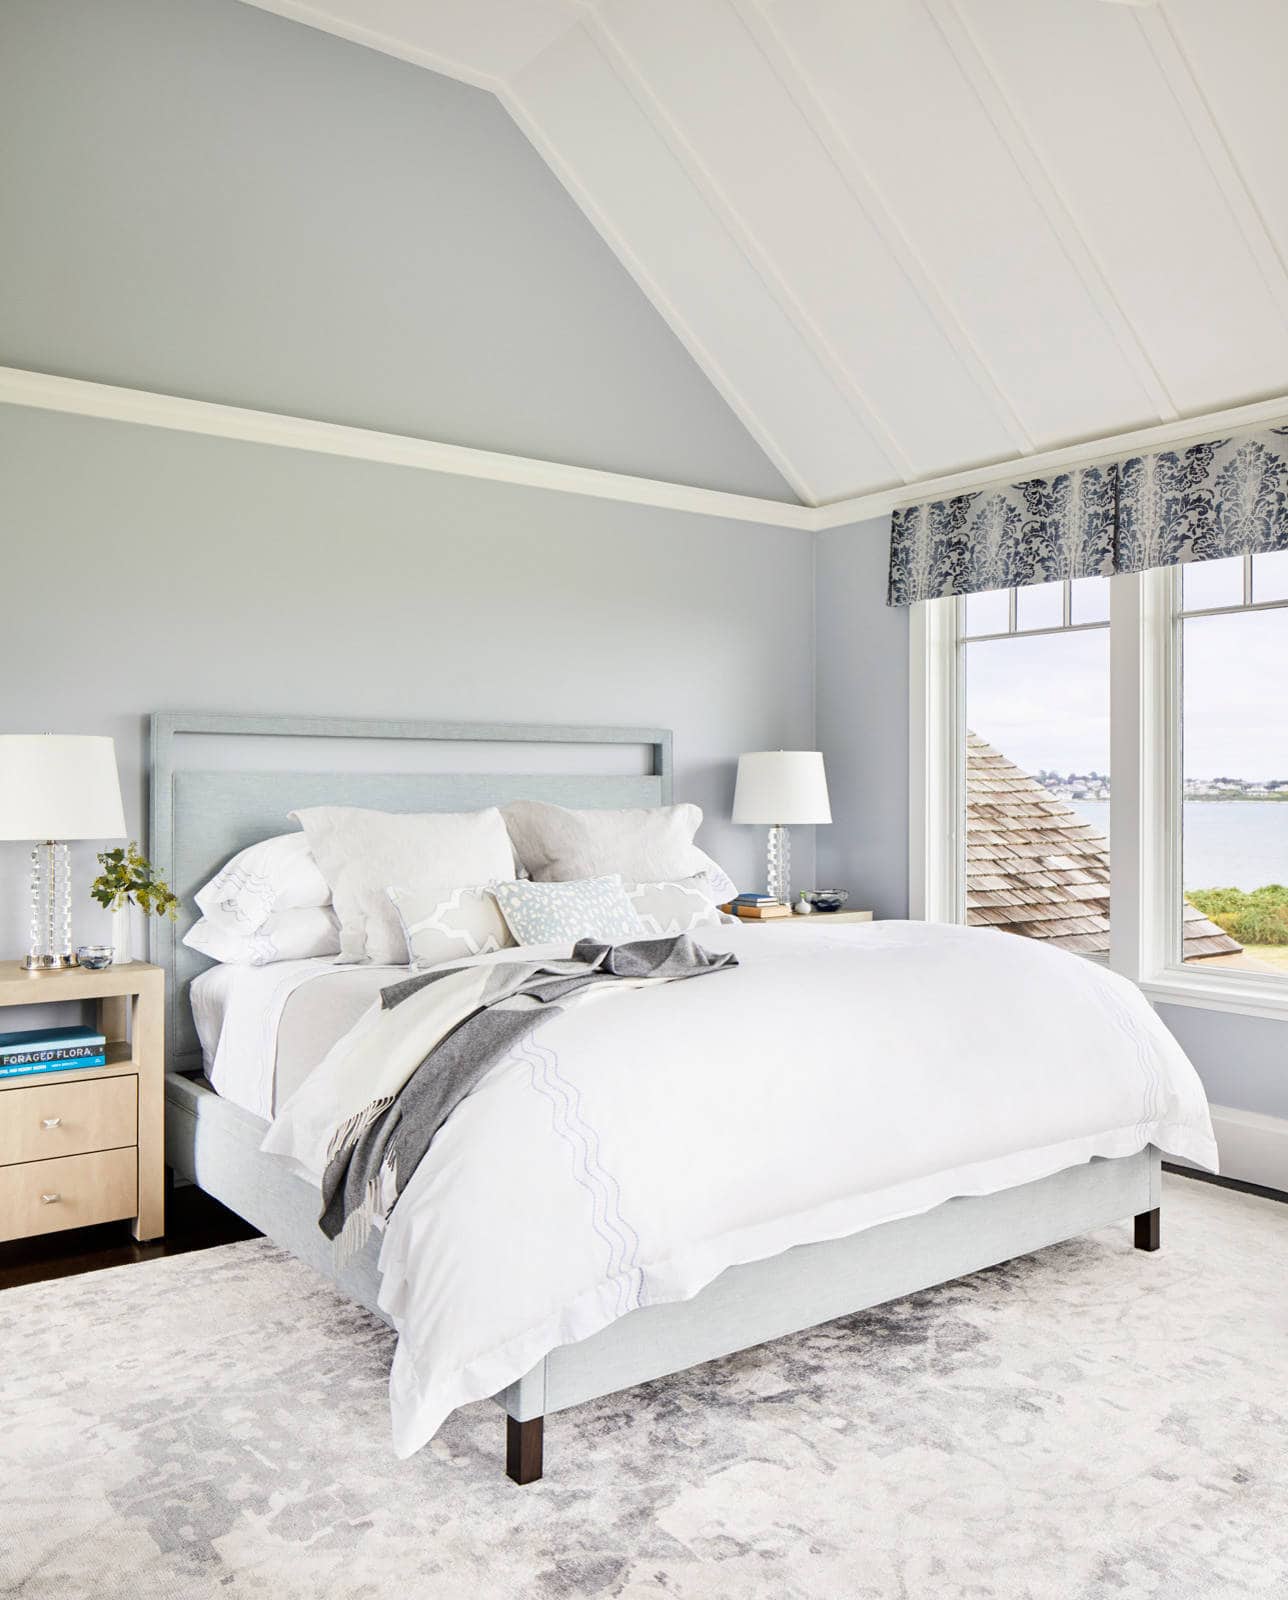 beach style bedroom in blue and white color scheme in coastal style decor